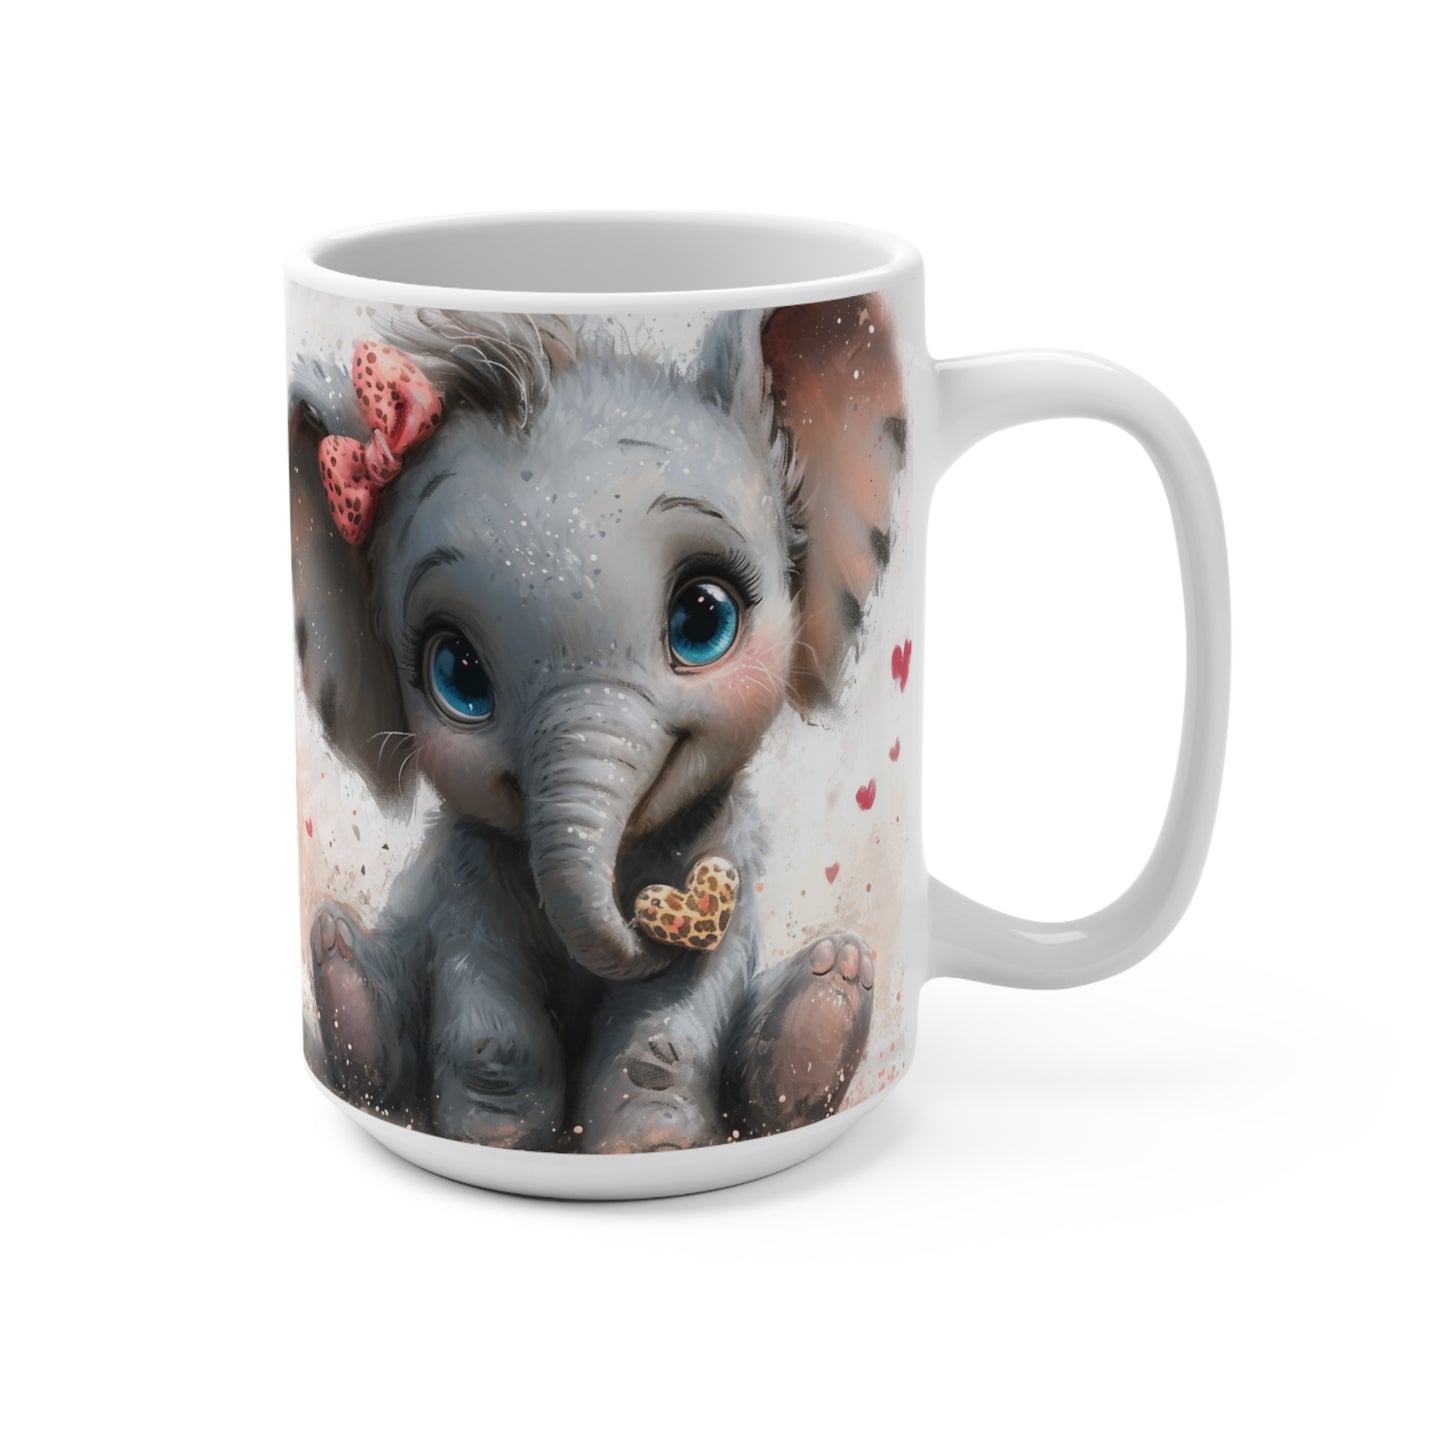 Adorable Baby Elephant Mug with Leopard Print Heart, Cute Animal Lover Coffee Cup, Pink Bow, Watercolor Art, Perfect Gift for Her, Mug 15oz